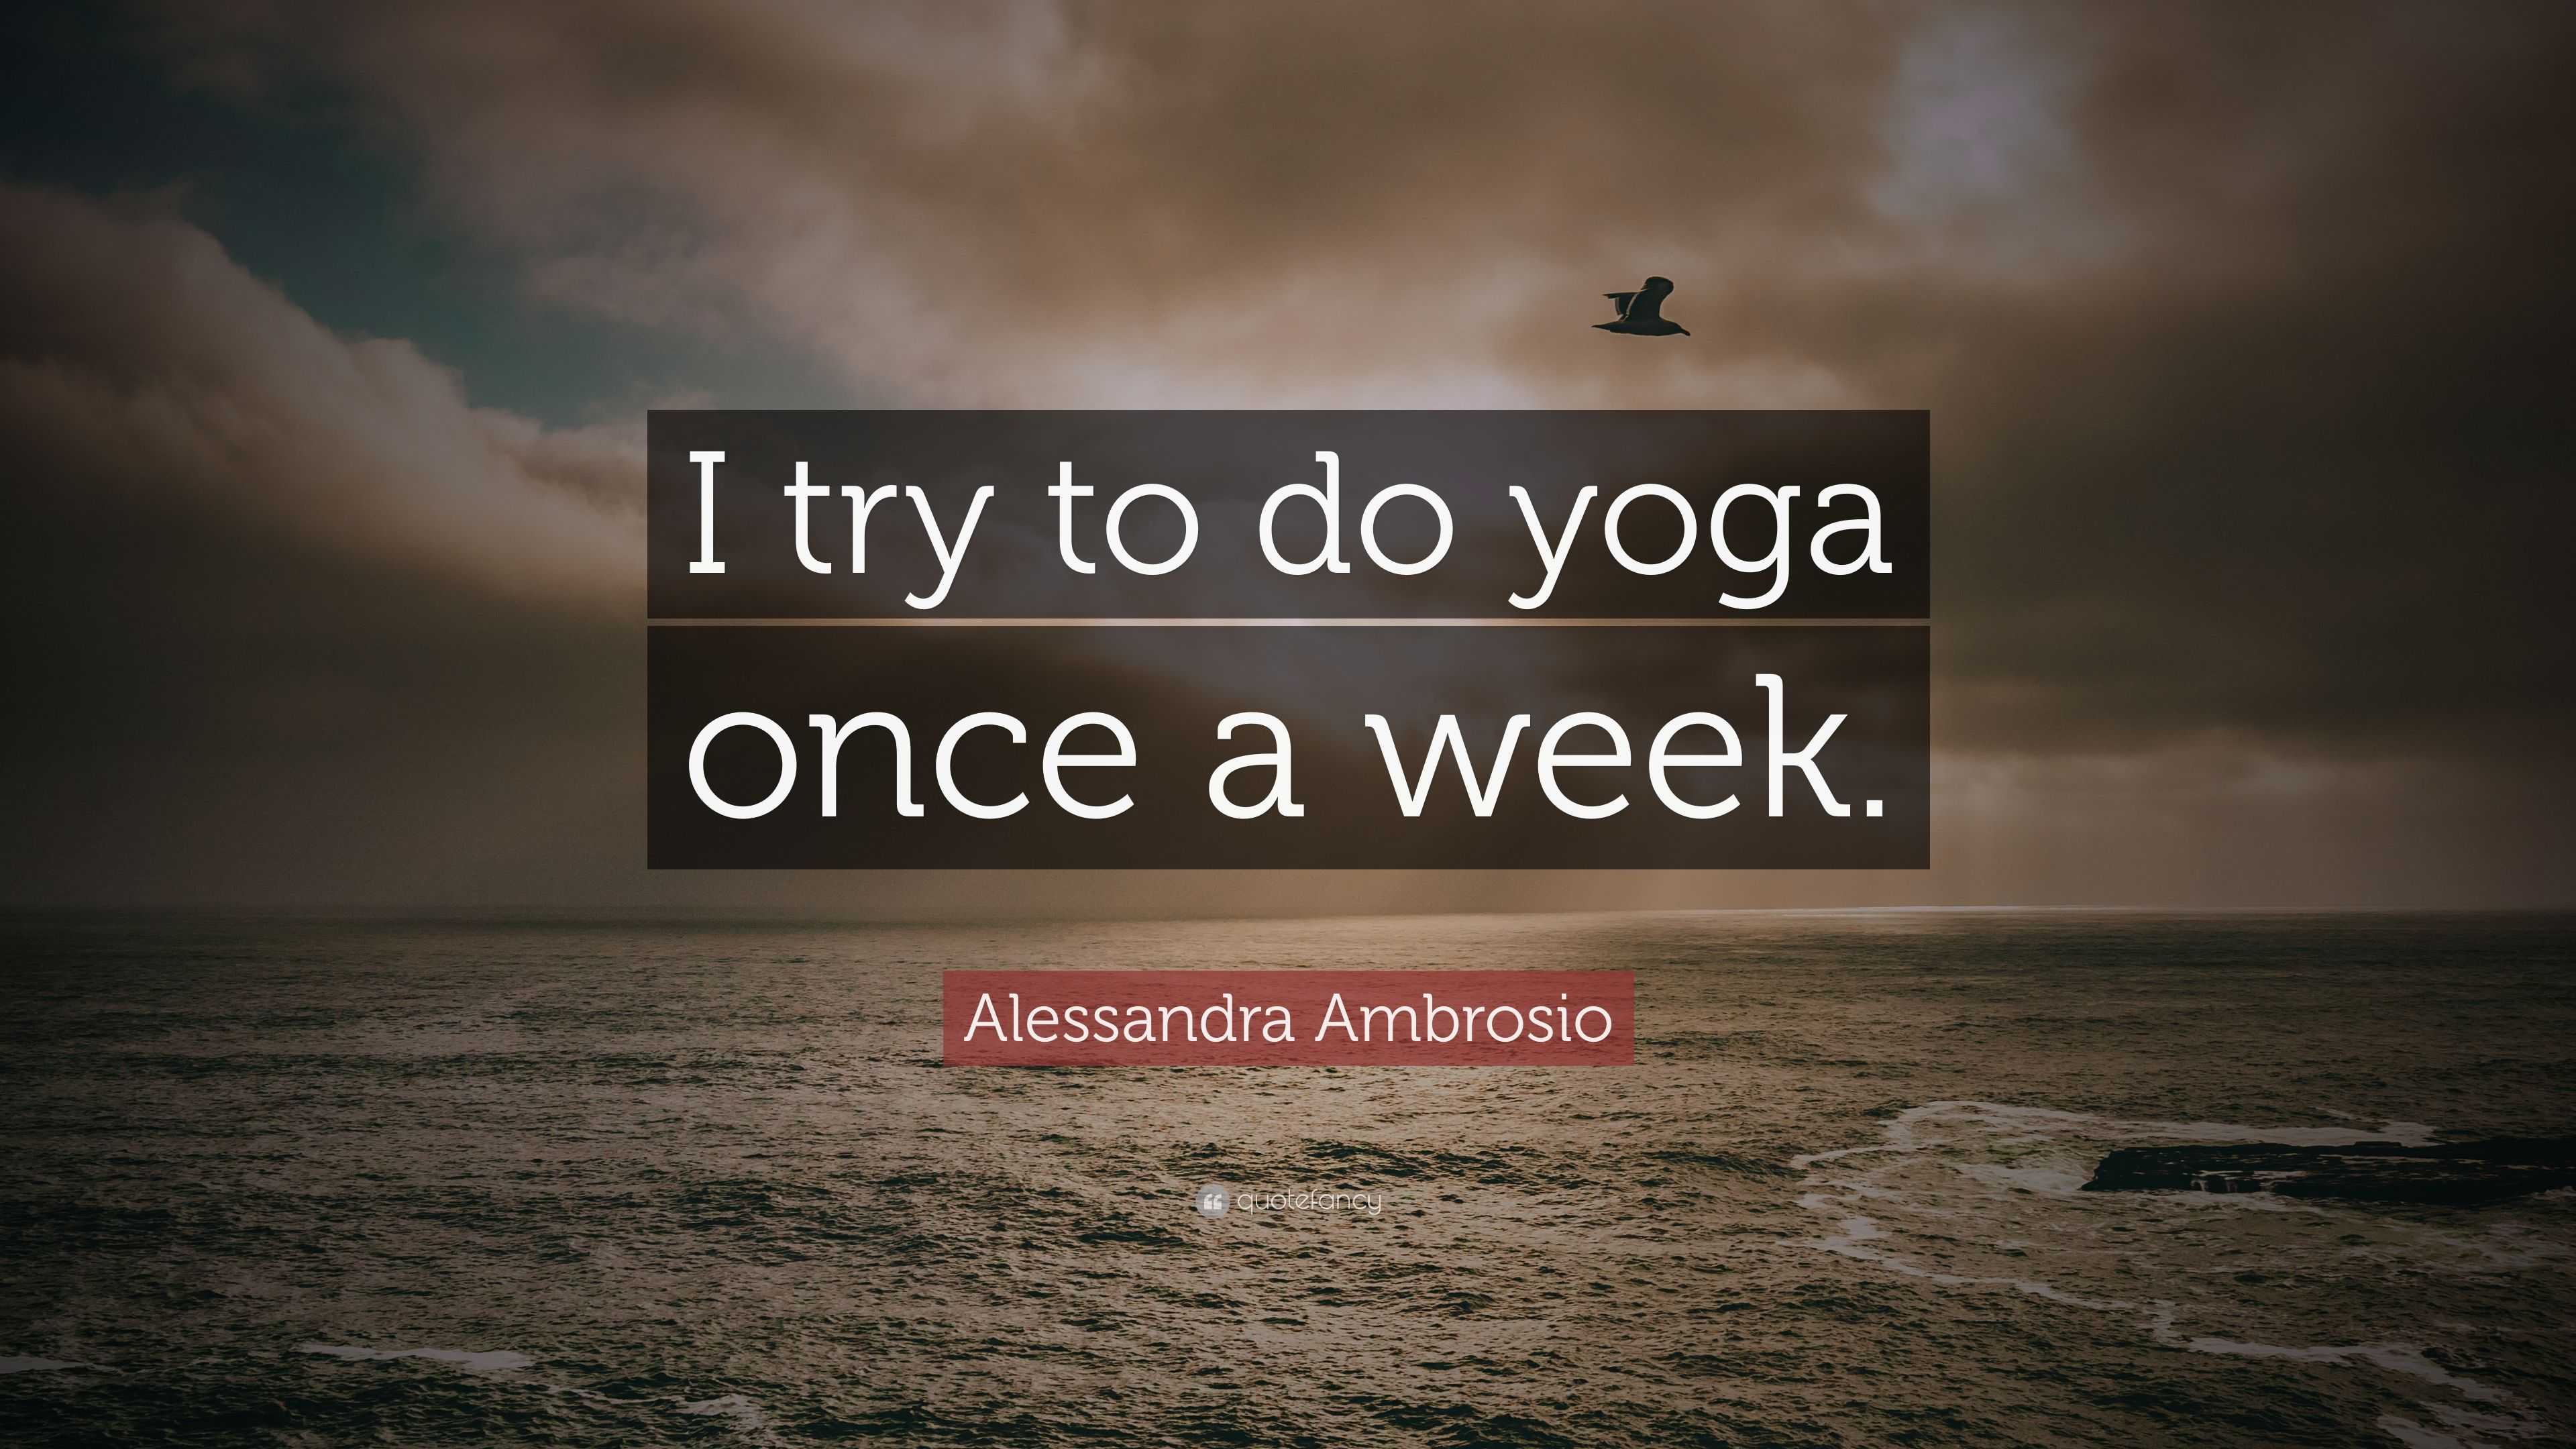 Alessandra Ambrosio Quote: “I Try To Do Yoga Once A Week.”